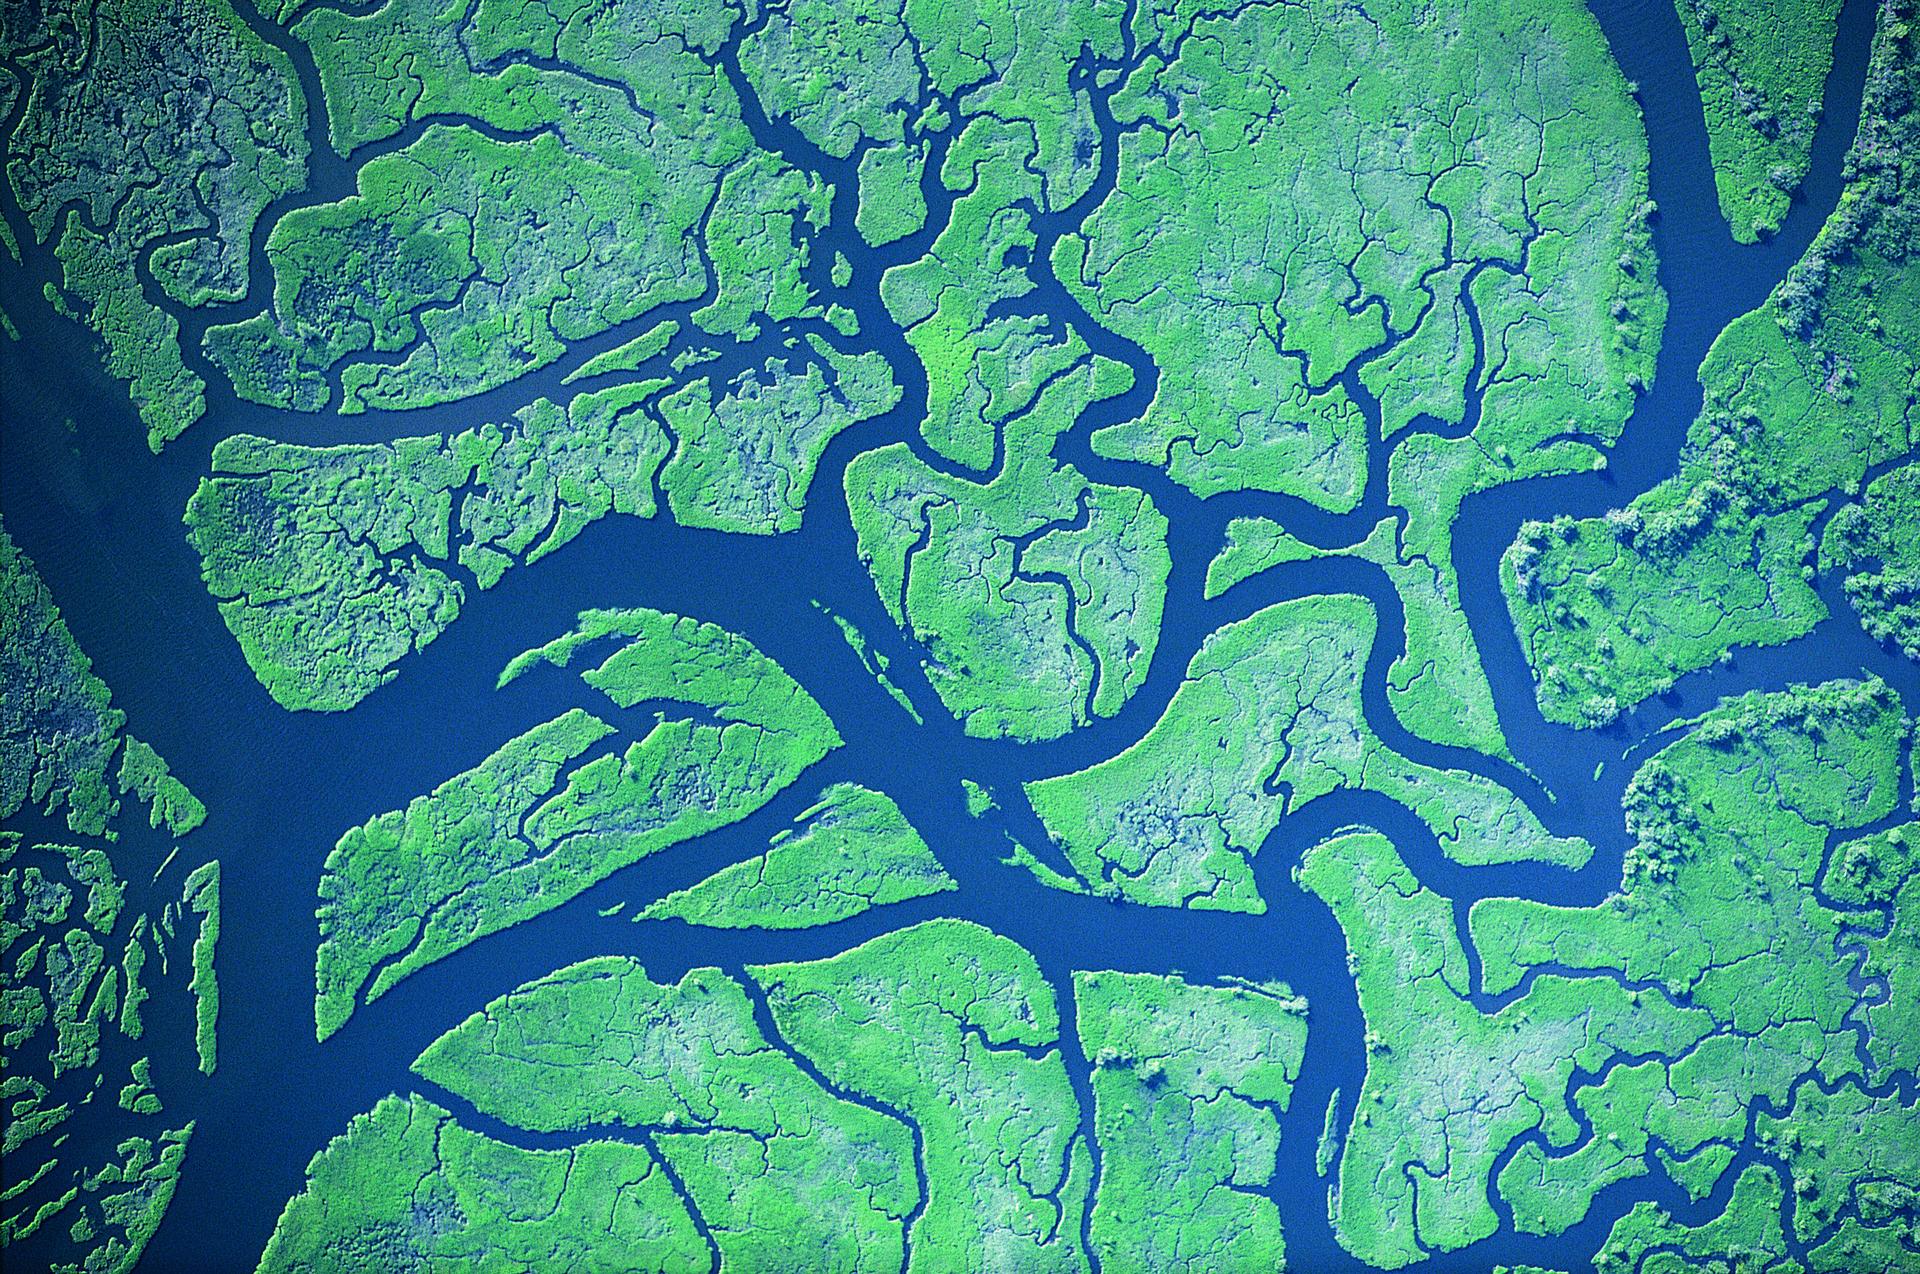 Aerial view of a river, showcasing the mesmerizing beauty of the world from above.